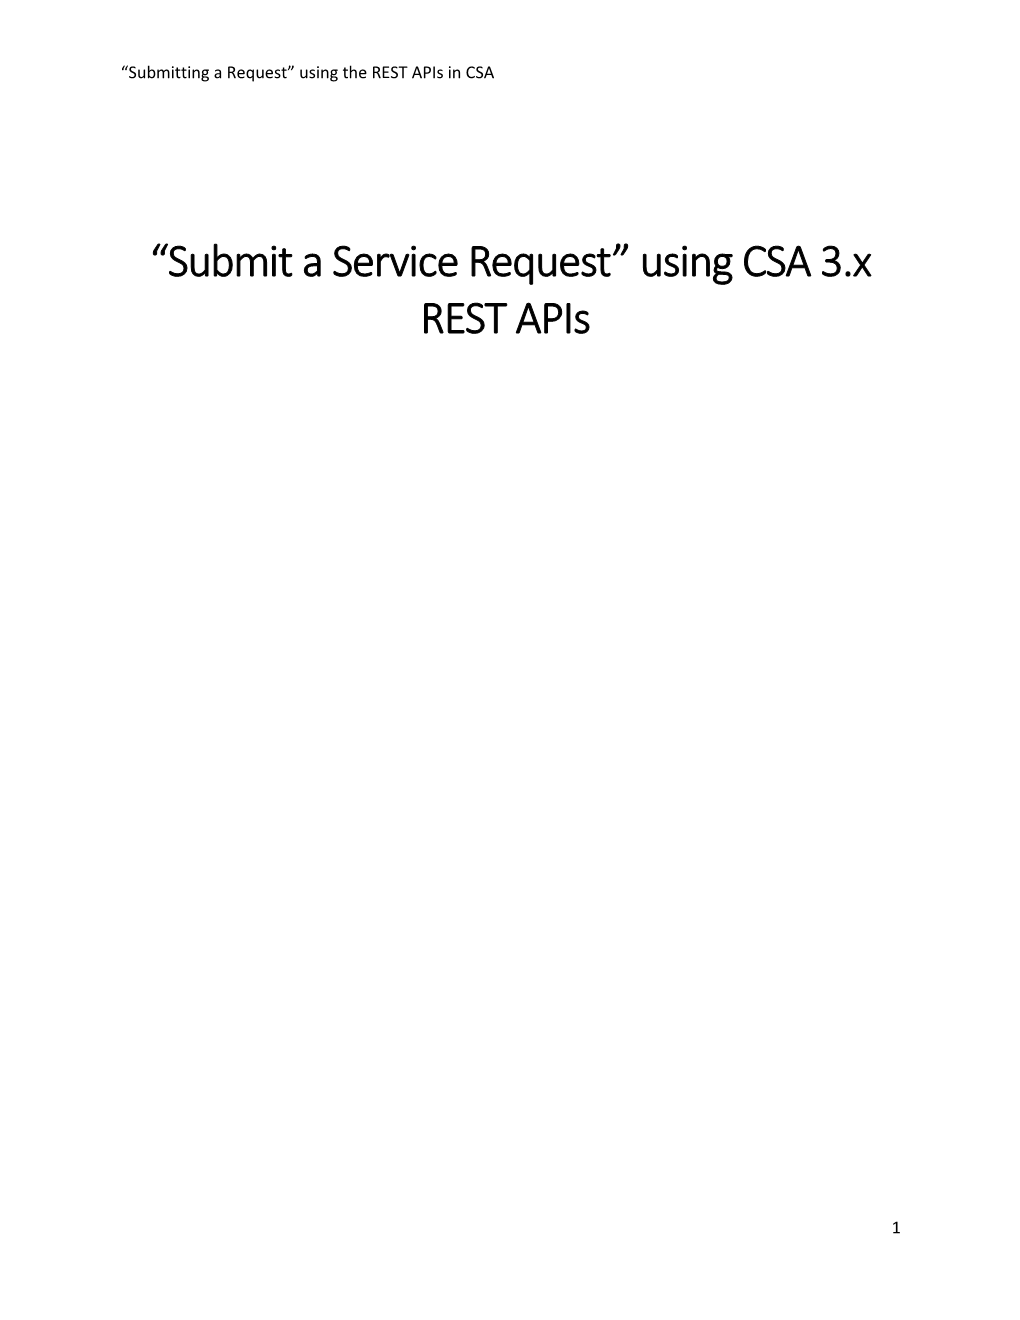 CSA 4.01 API Guide for Submitting a Request